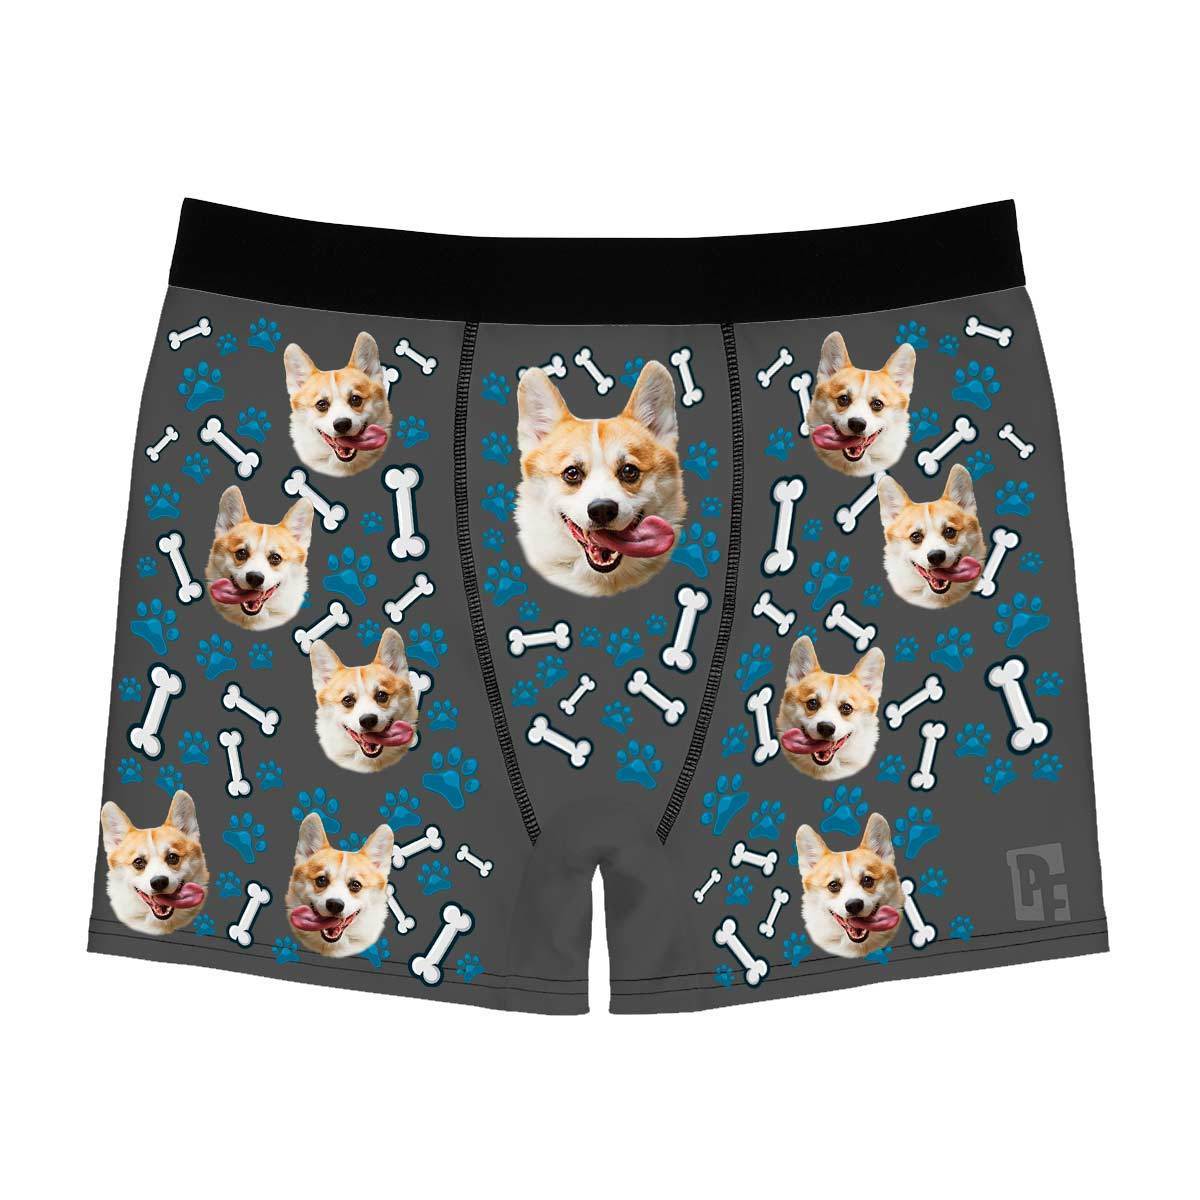 Dark Dog men's boxer briefs personalized with photo printed on them